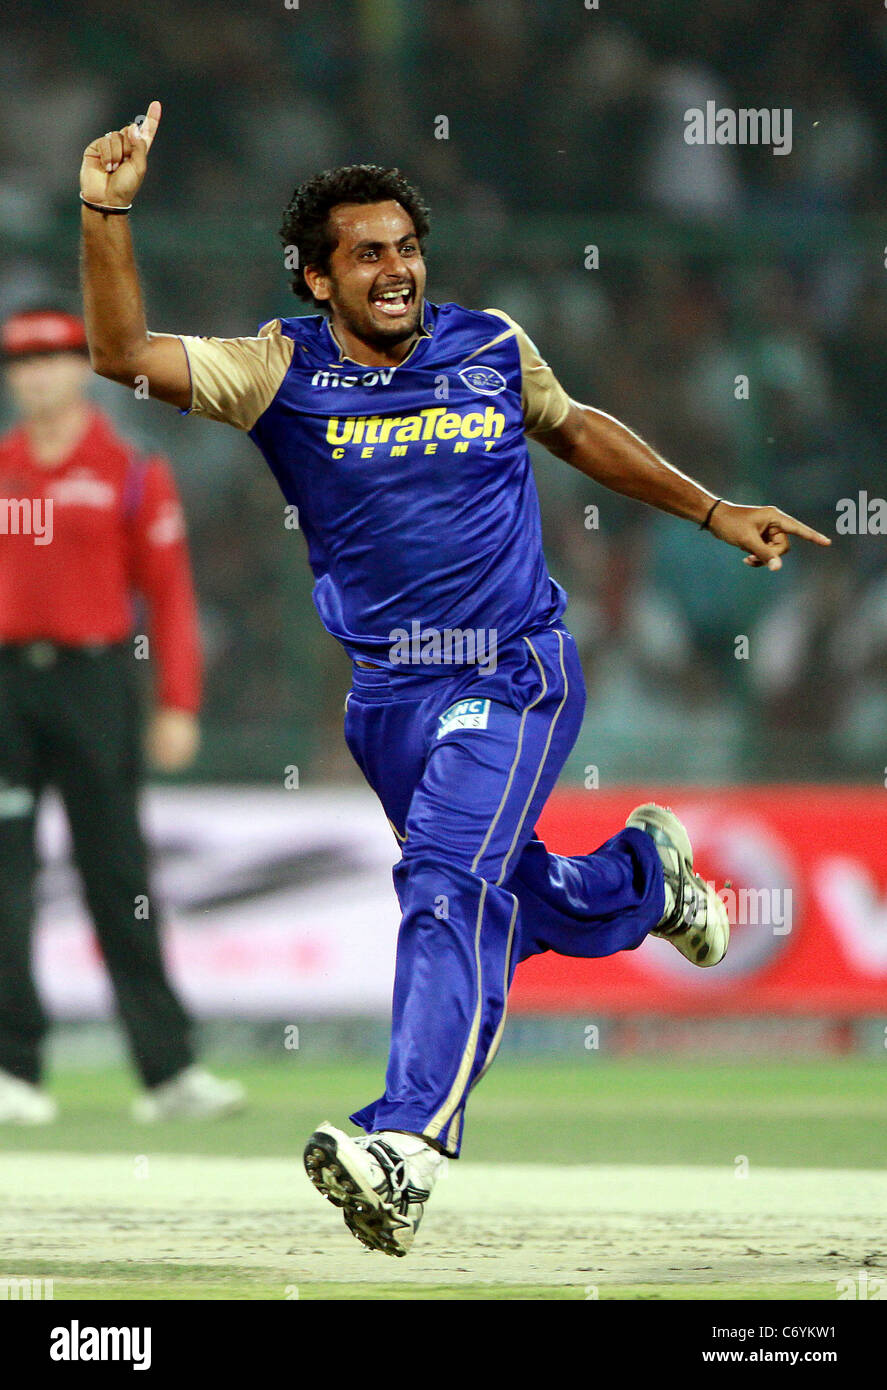 Rajasthan Royals player Sumit Narwal celebrates after taking wicket of Delhi Daredevils player Virender Sehwag at the Indian Stock Photo